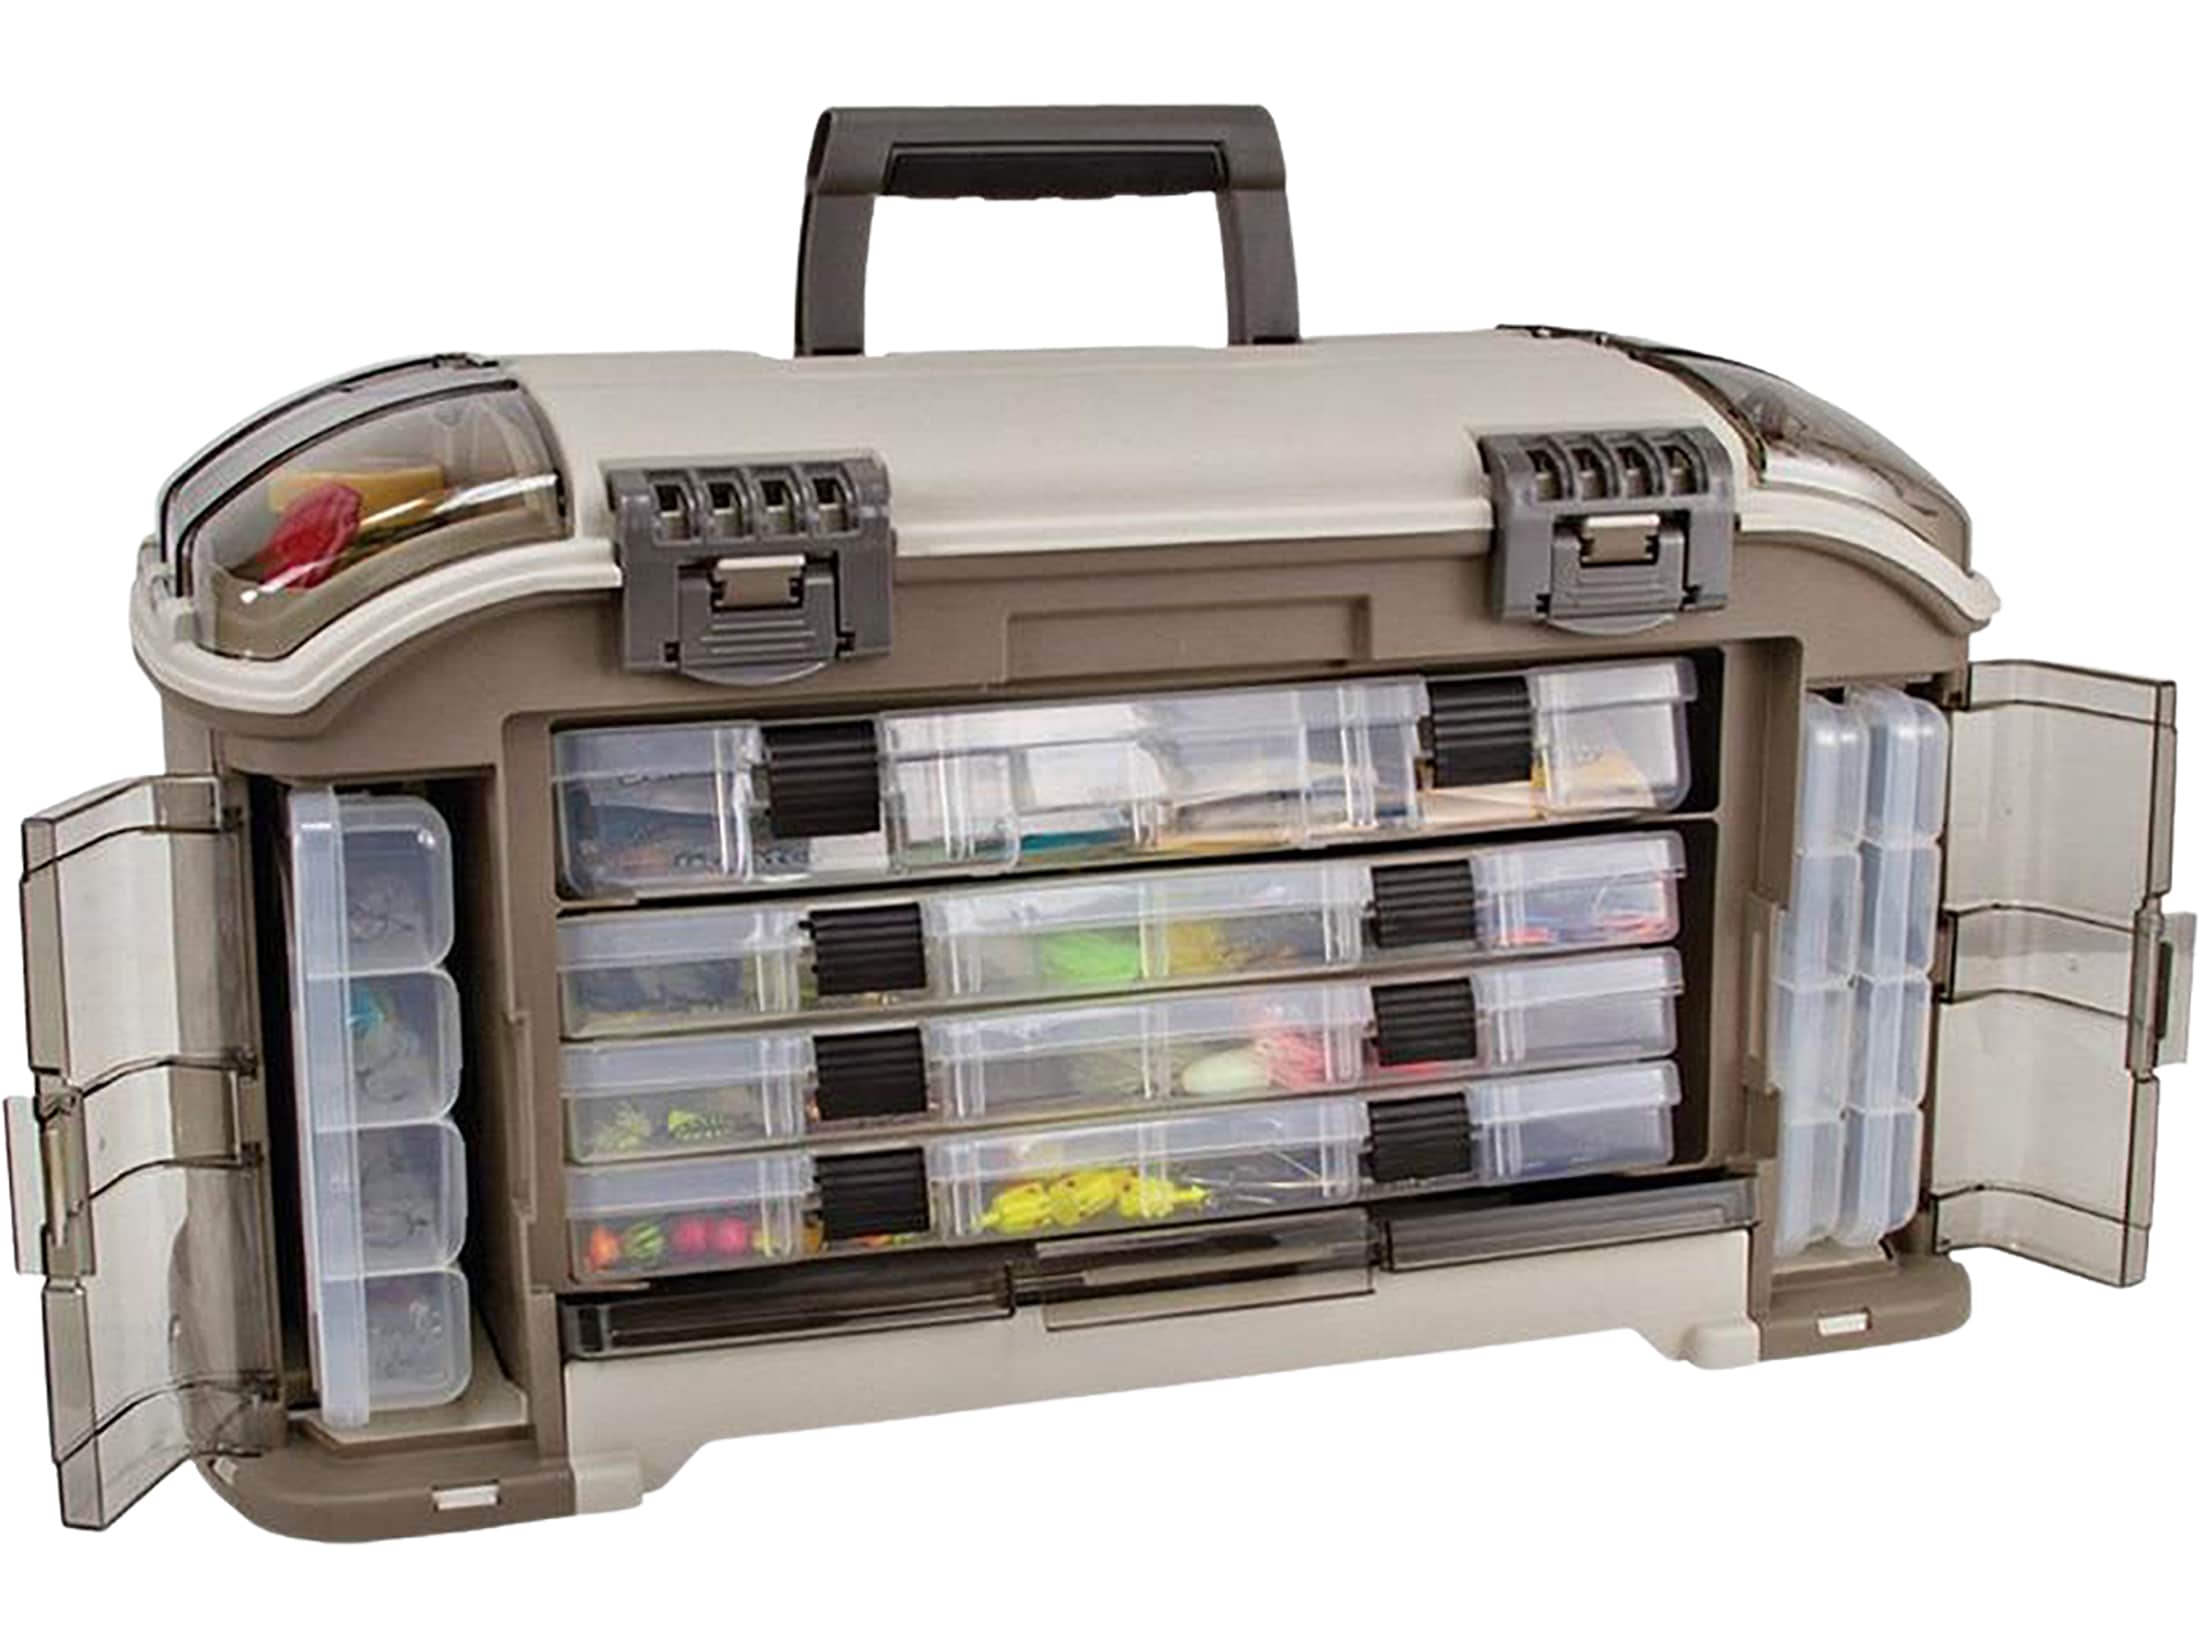 Plano Guide Series 3600 Angled Tackle Box System